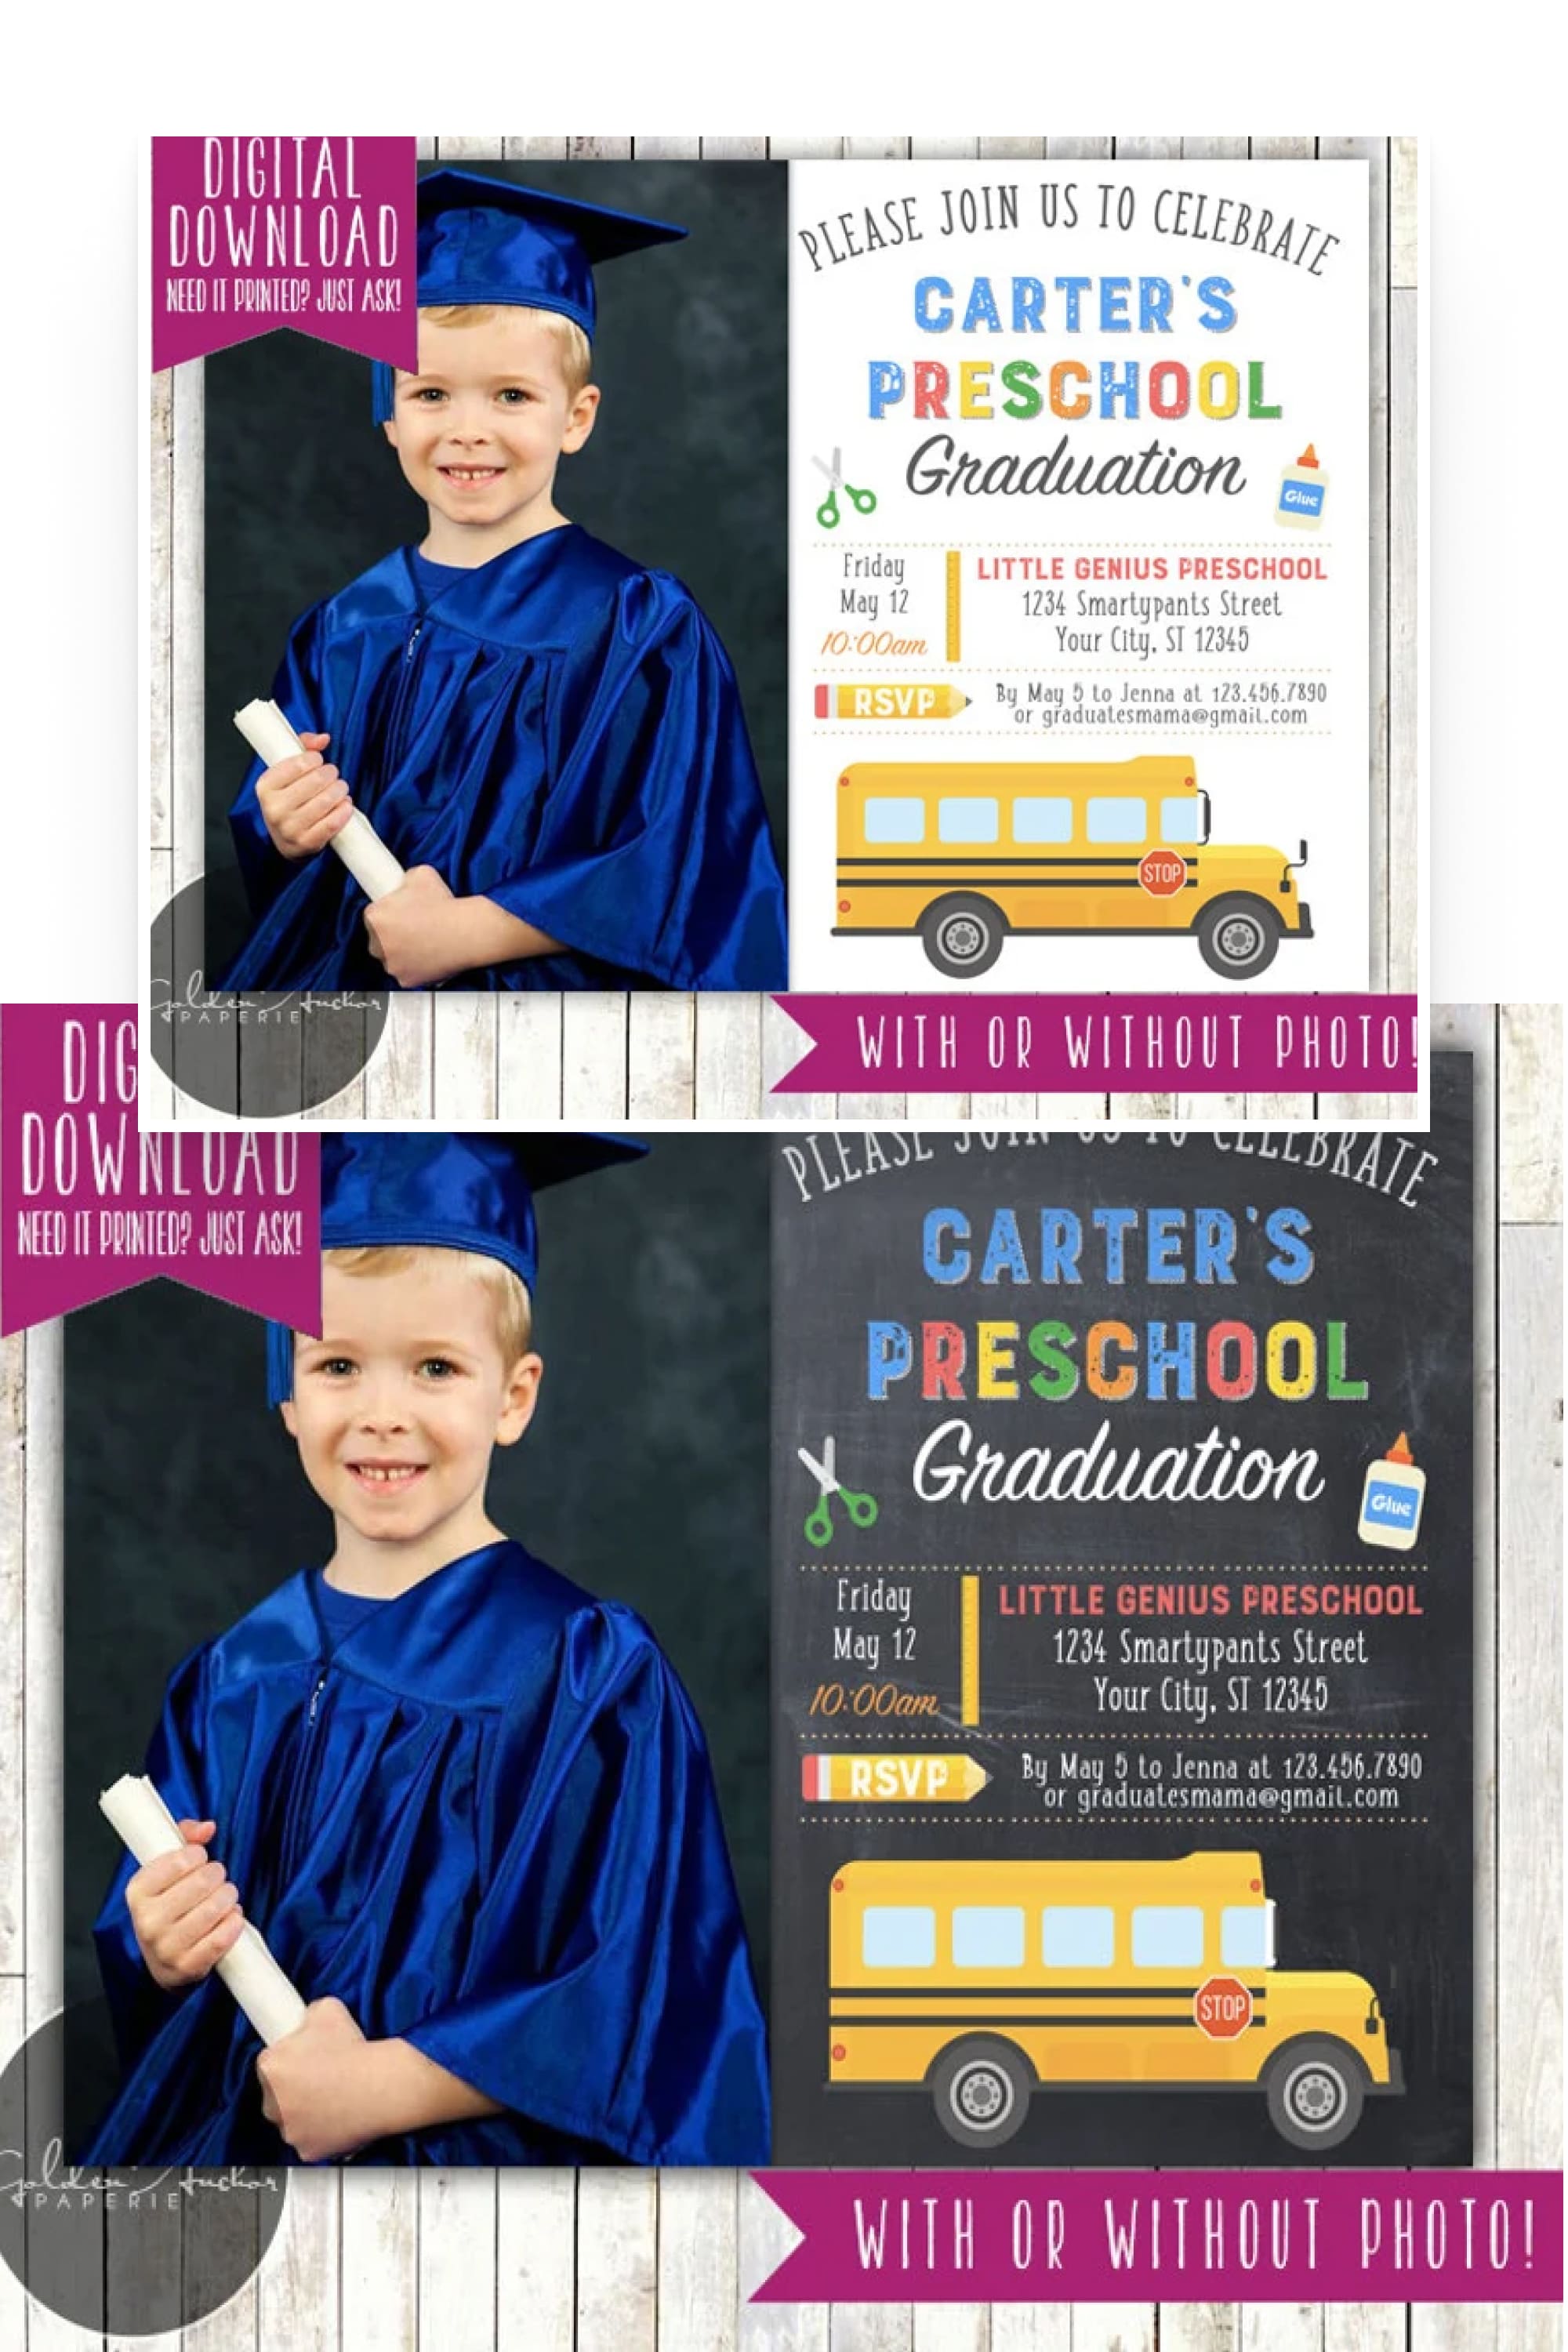 Kindergarten graduation invitation with a painted bus and a photo of a boy in a blue cape.